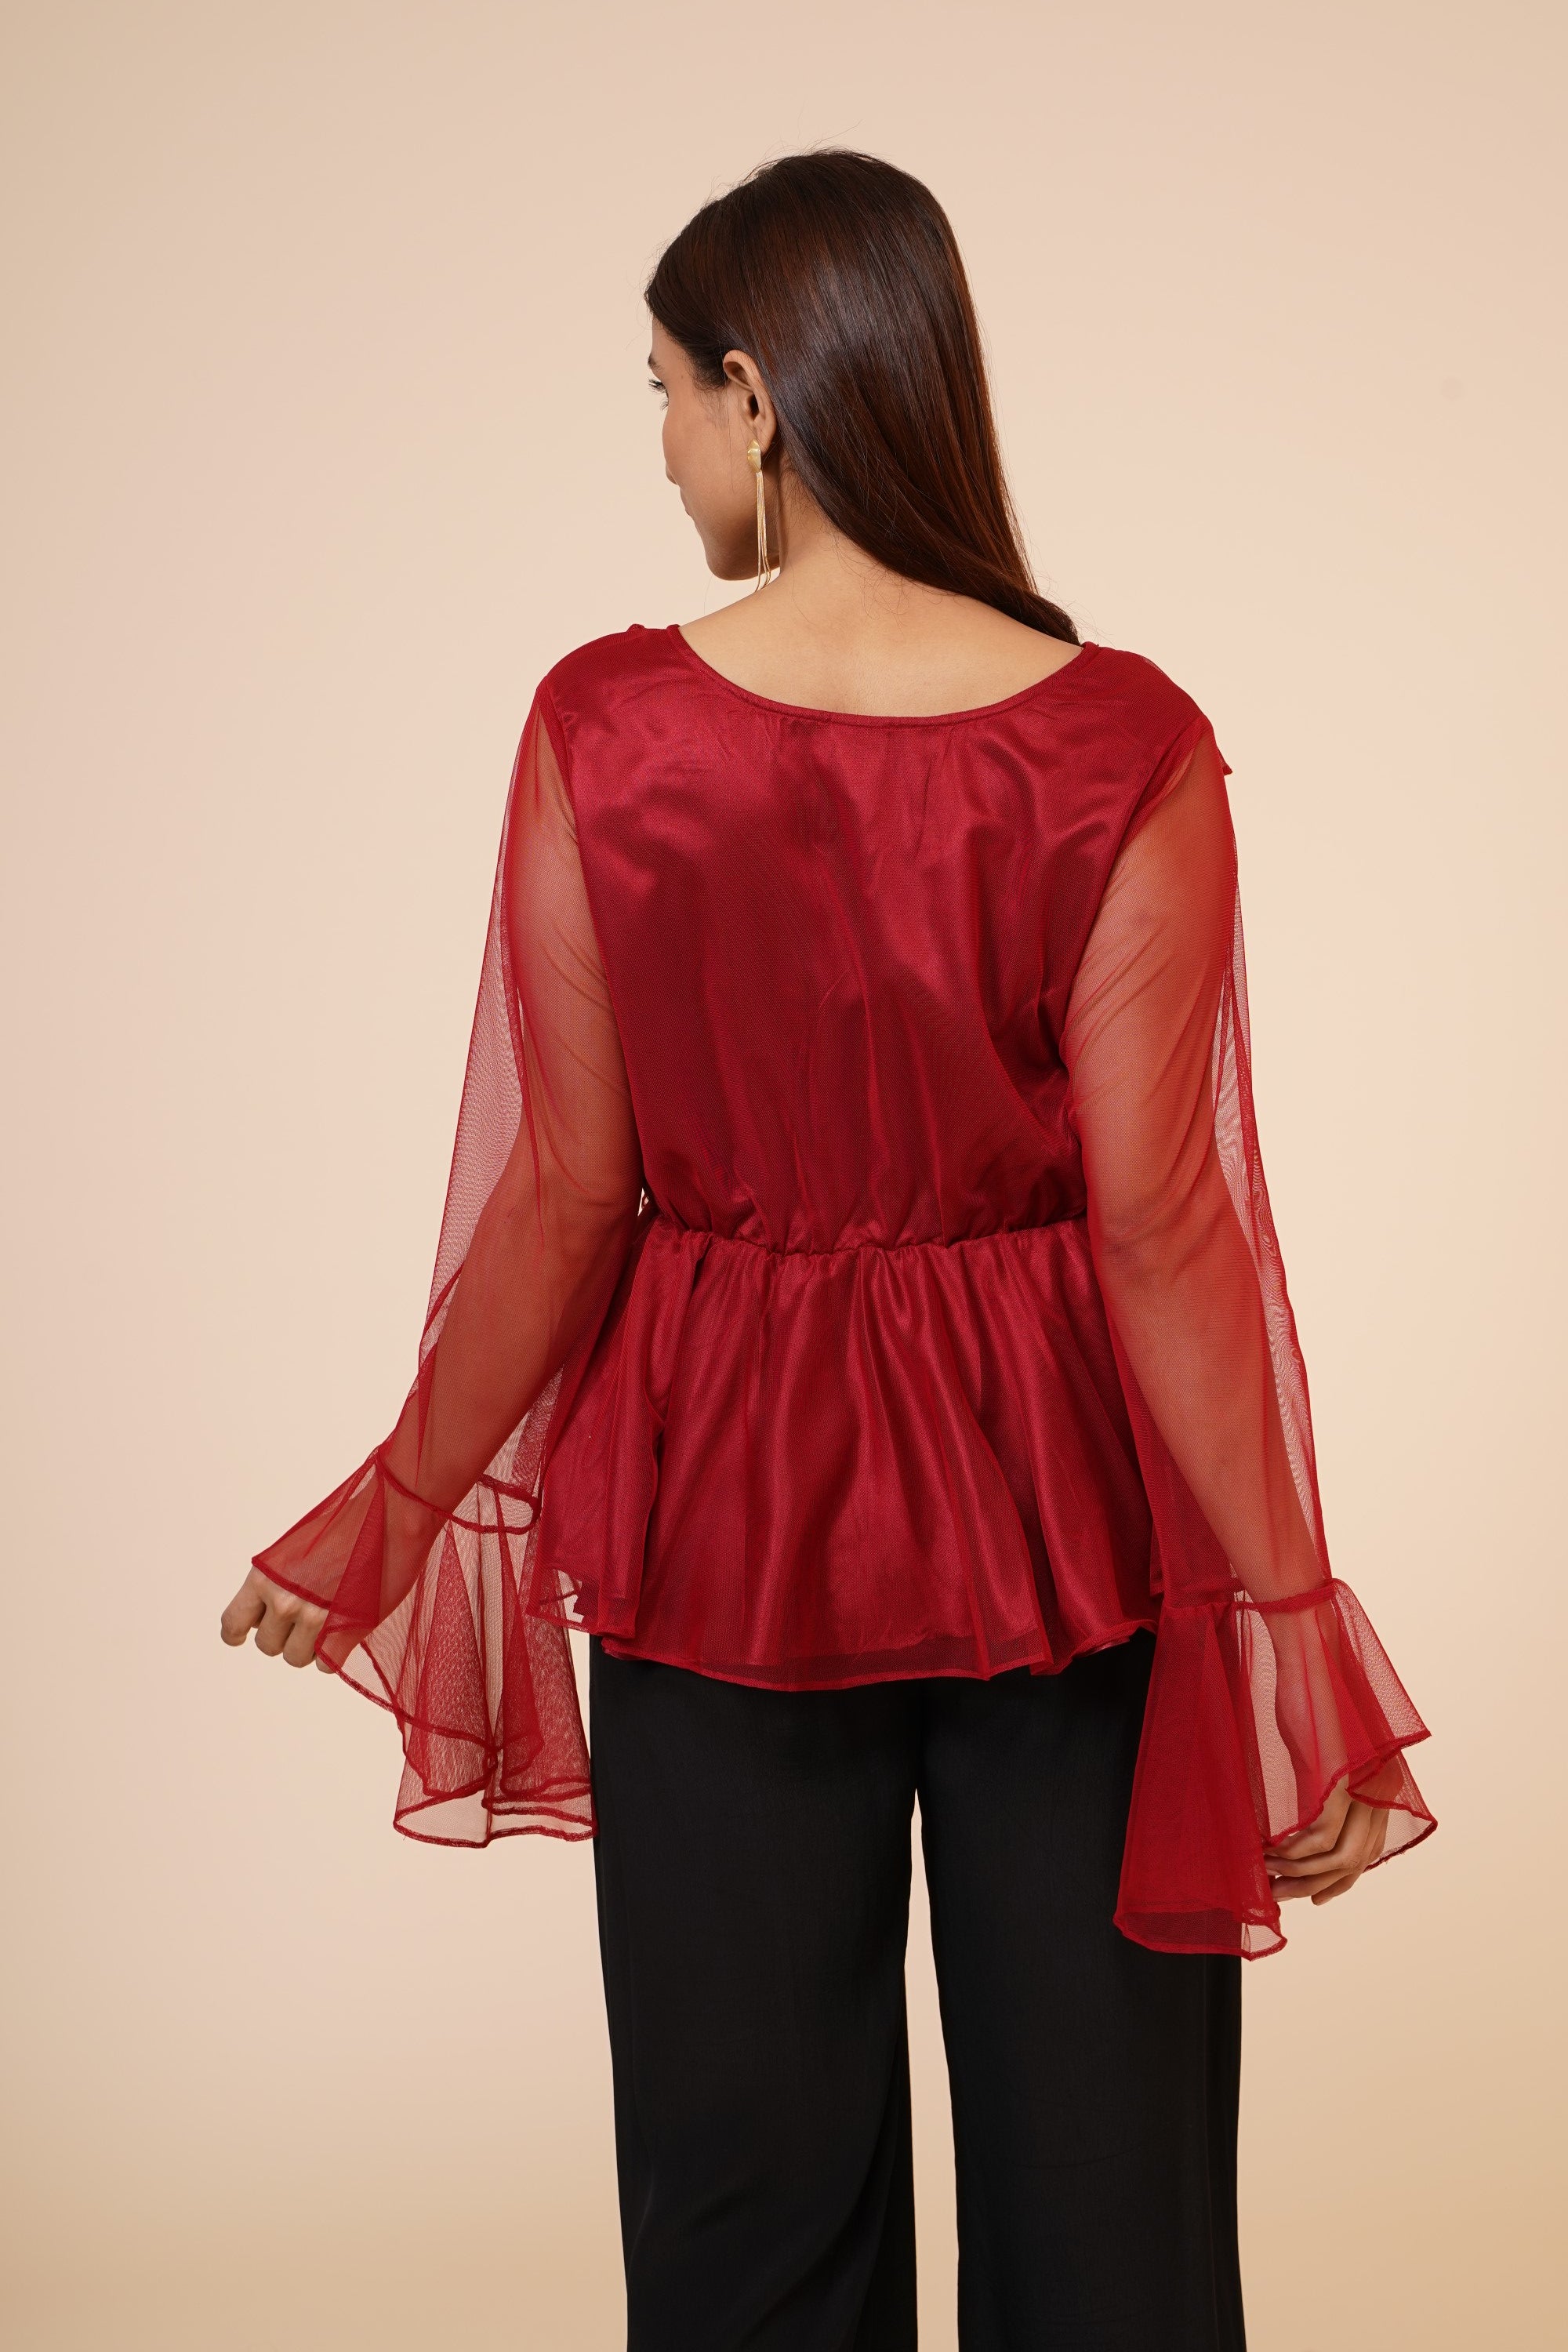 Women's Net Party Long Ruffle Sleeves Top In Maroon - MIRACOLOS by Ruchi